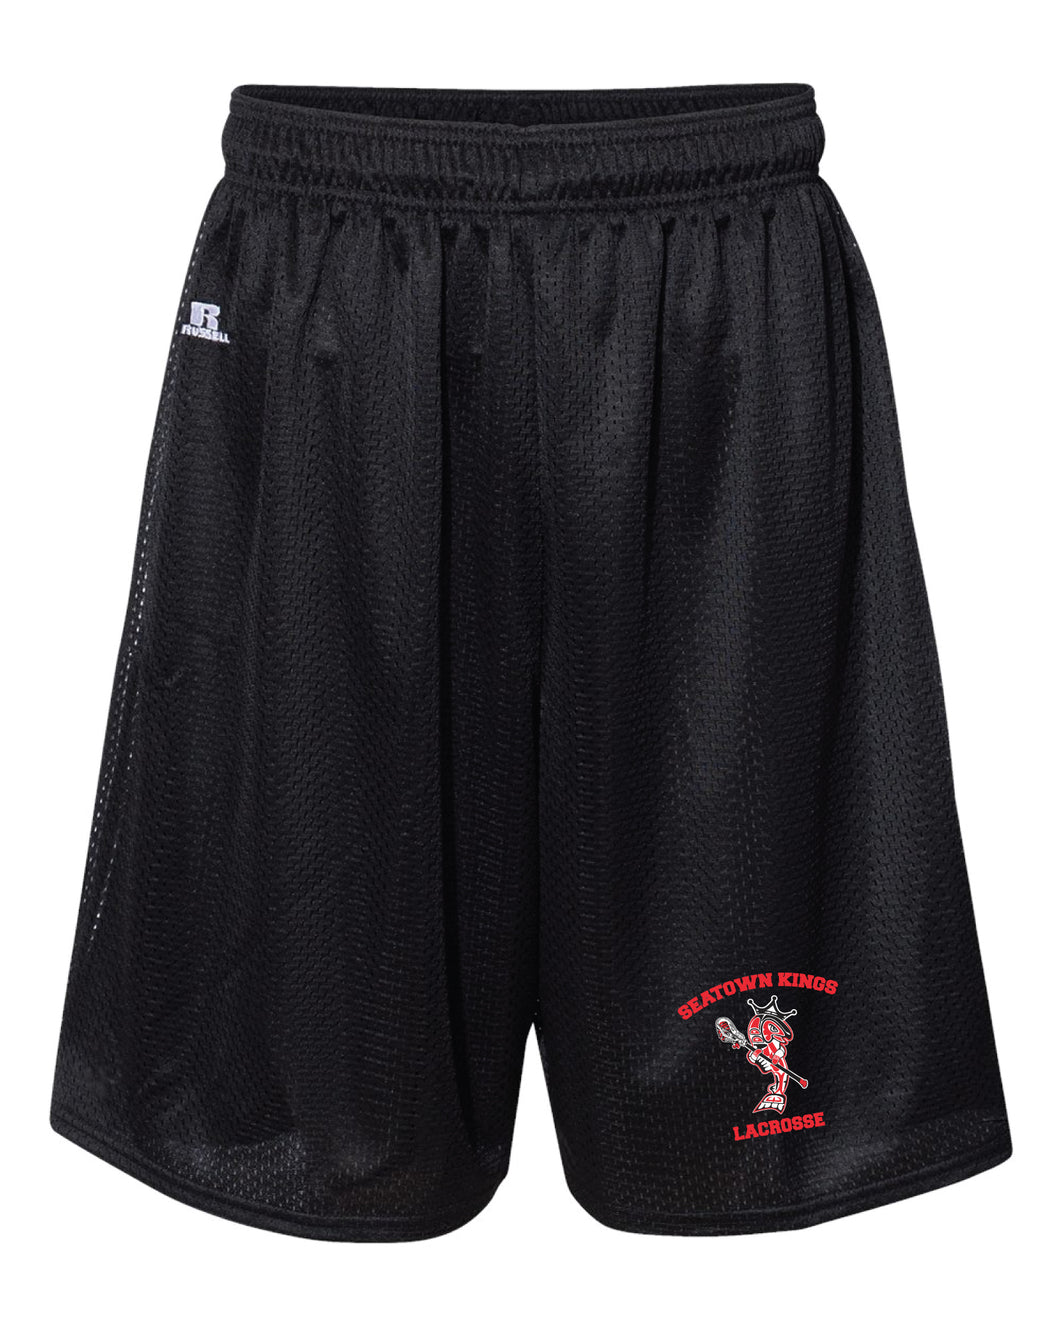 Seatown Kings Russell Athletic Tech Shorts - Black - 5KounT2018